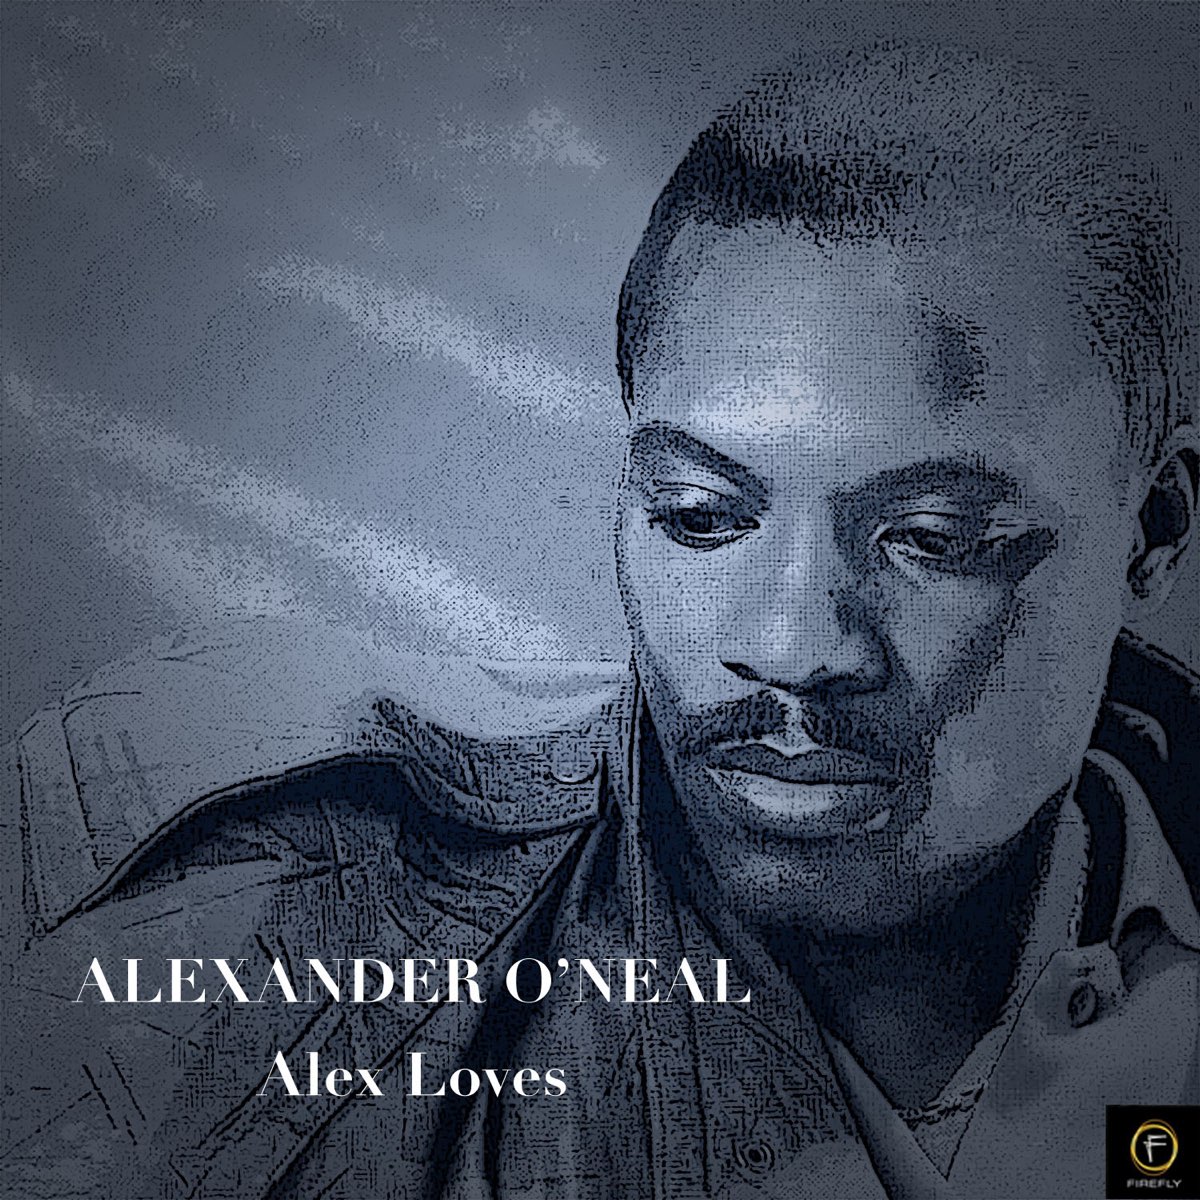 Alexander o'Neal if you were here Tonight. From Alex with Love.